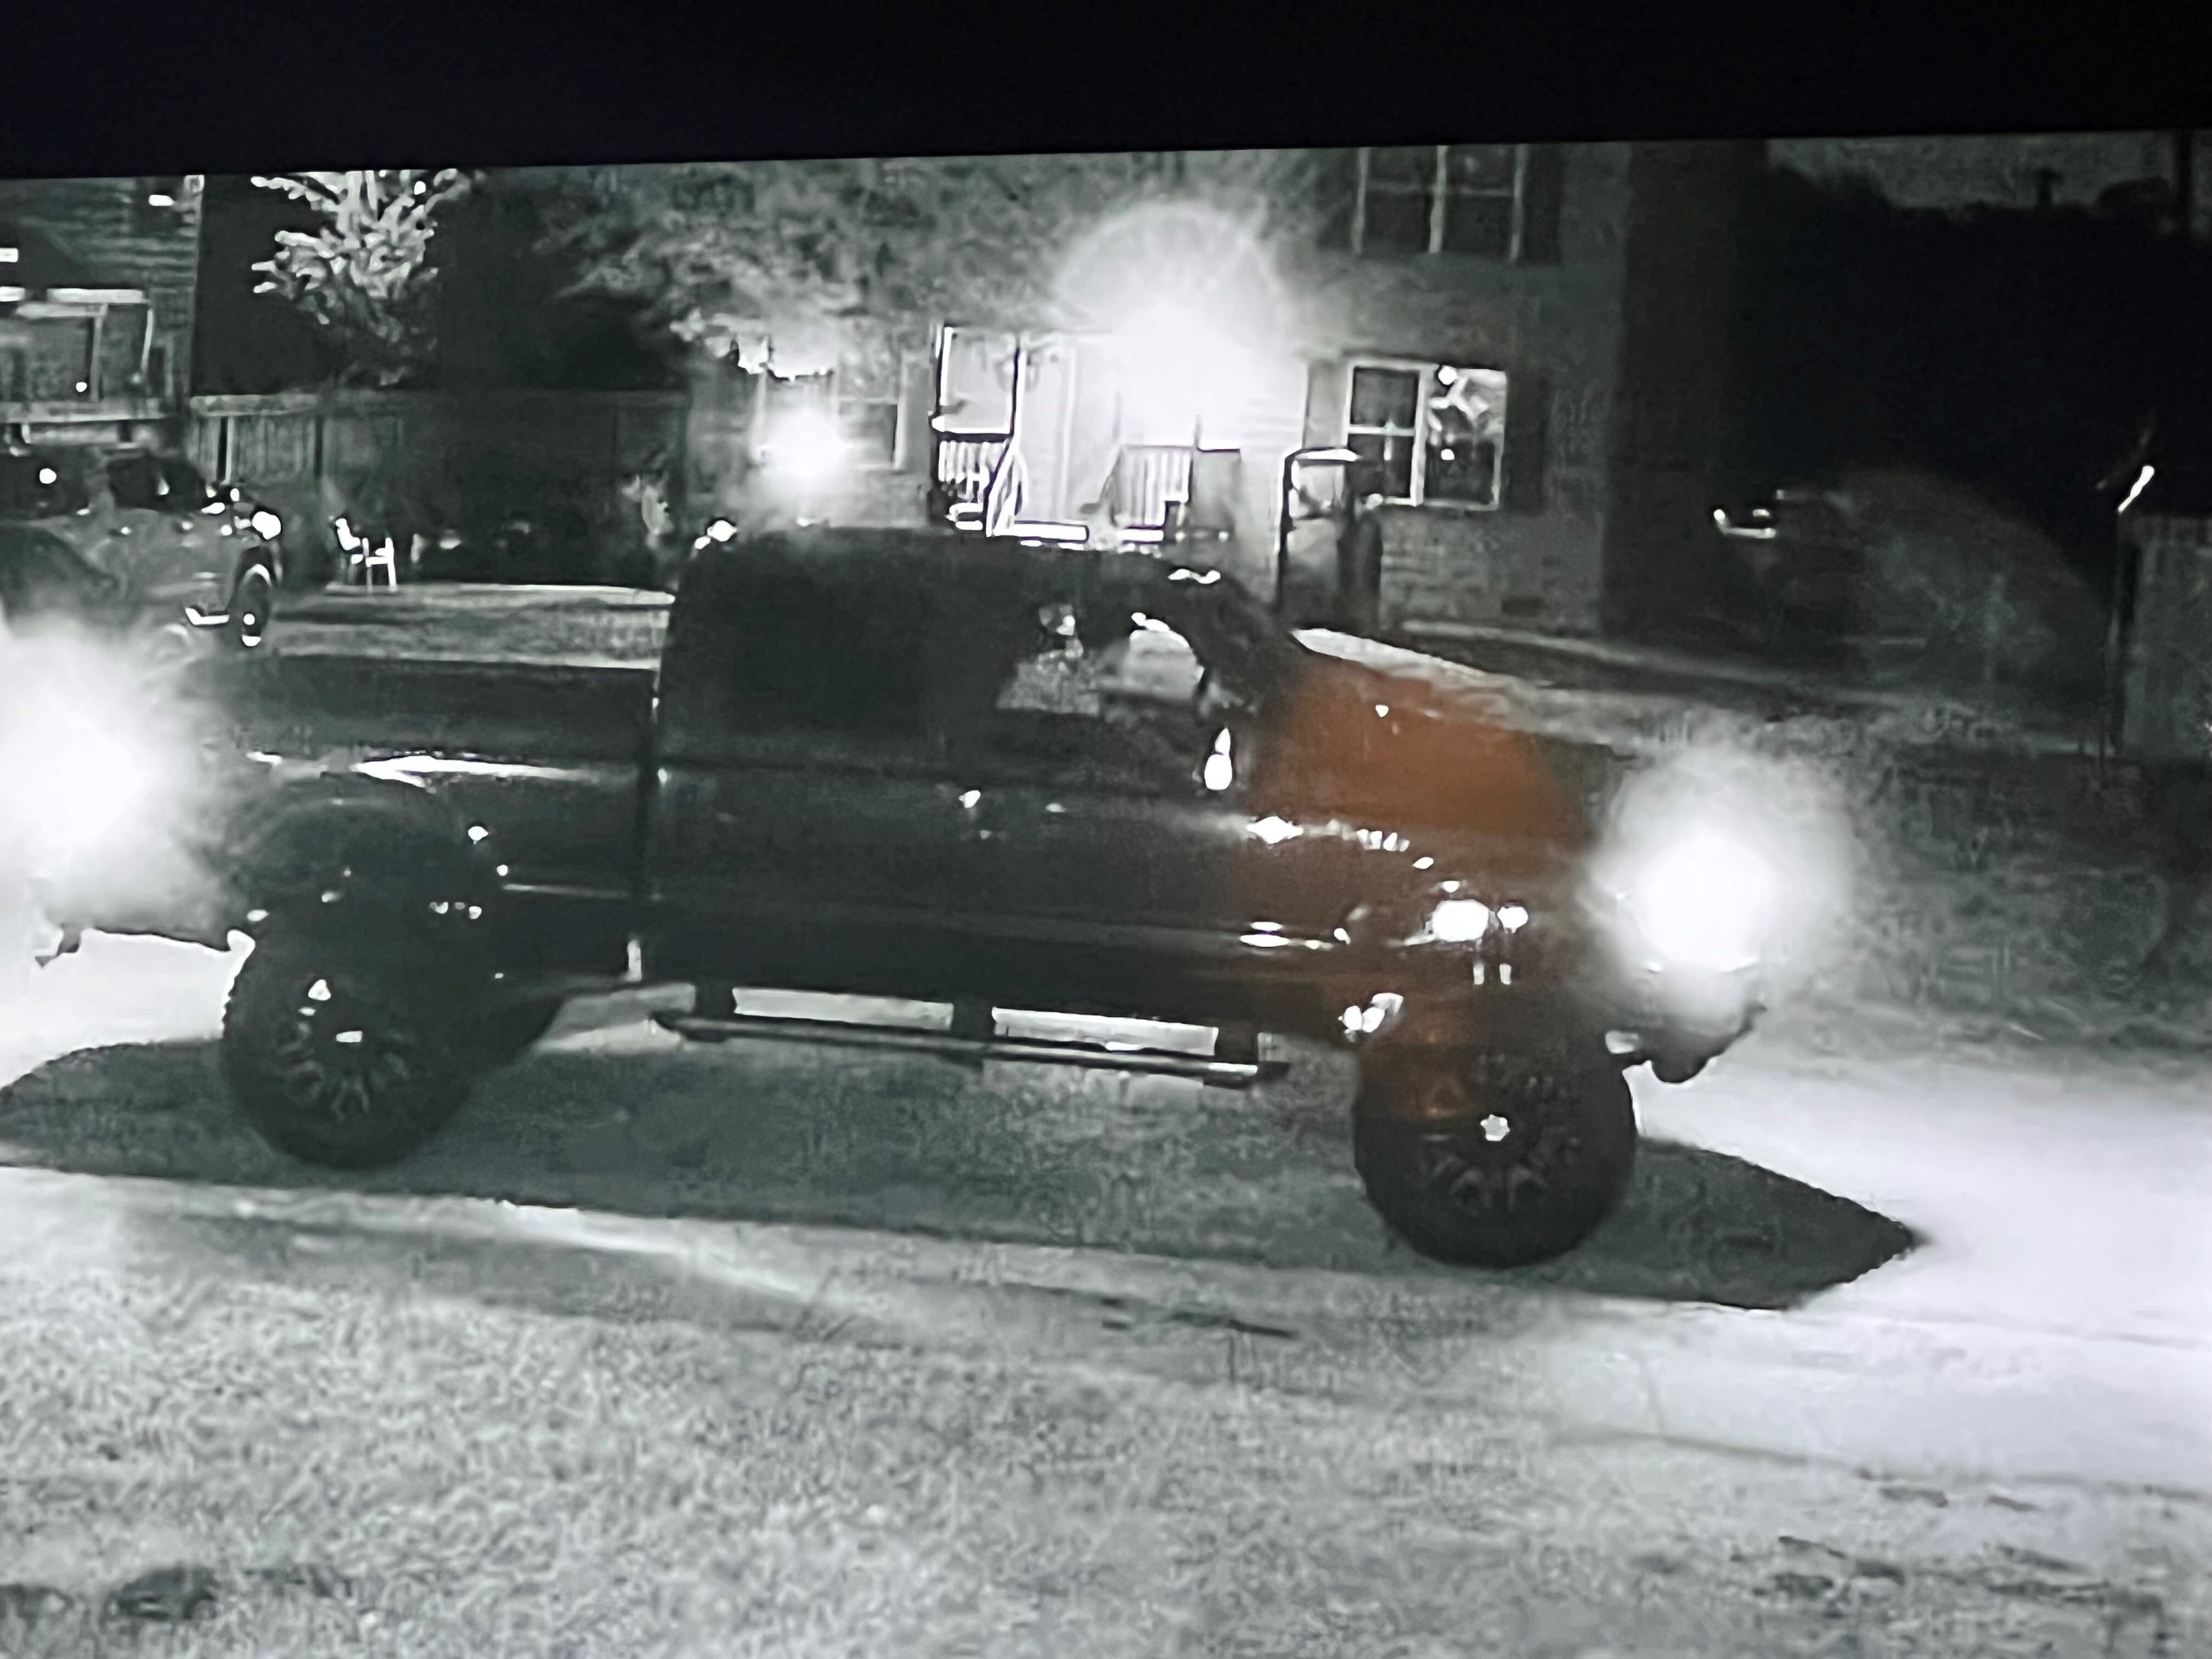 WANTED SUSPECT VEHICLE